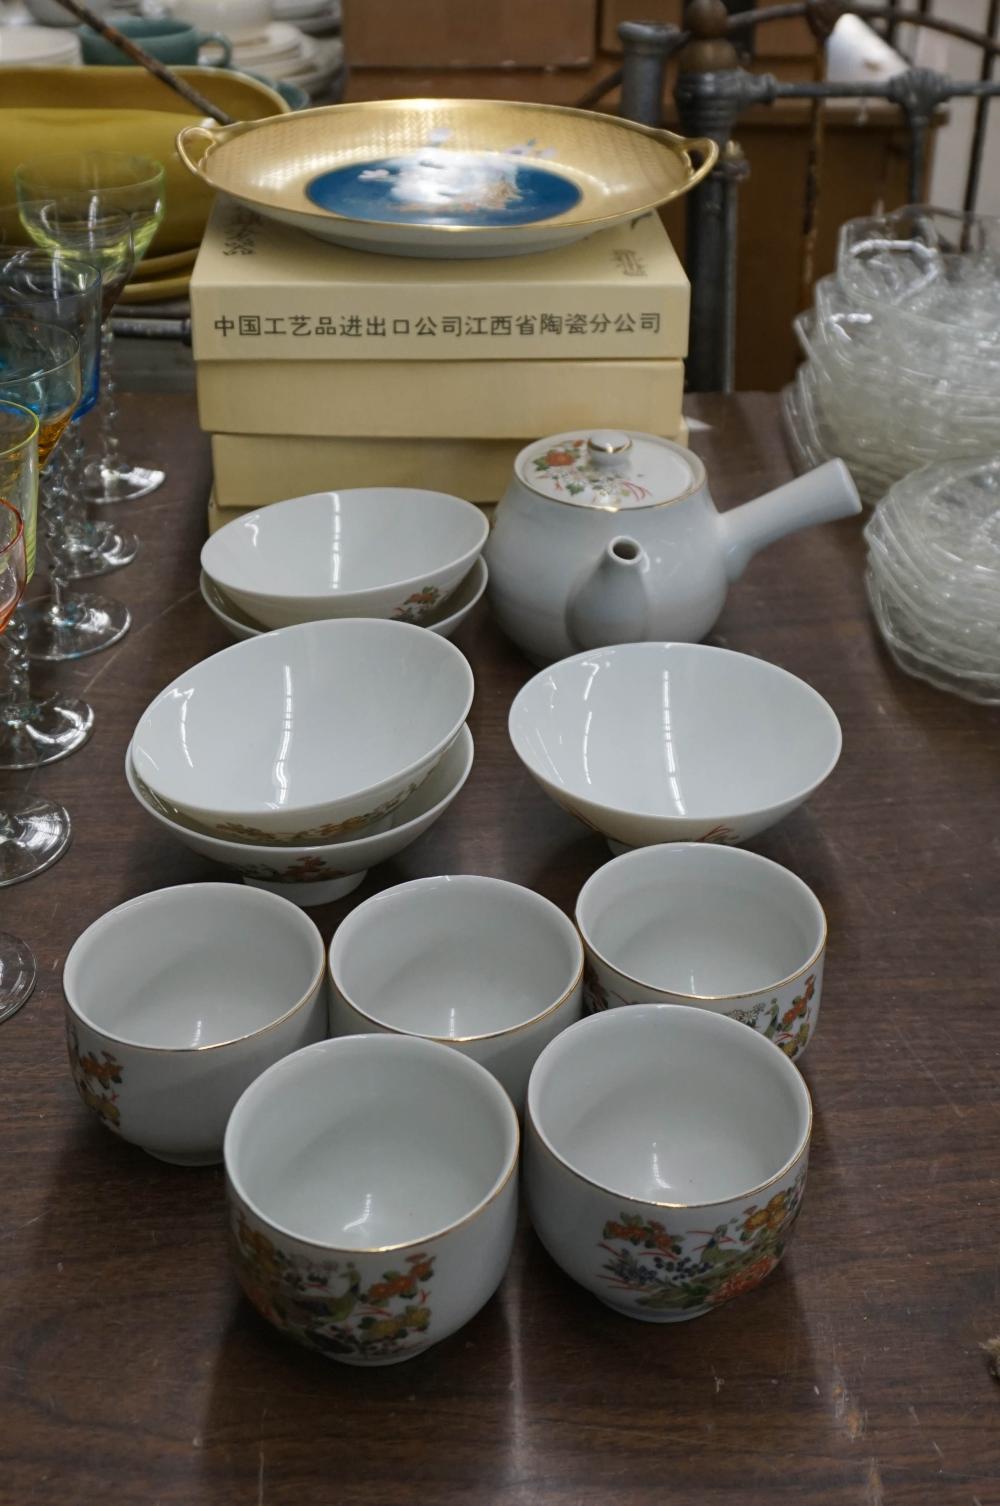 GROUP OF CHINESE PORCELAIN TEACUPS,